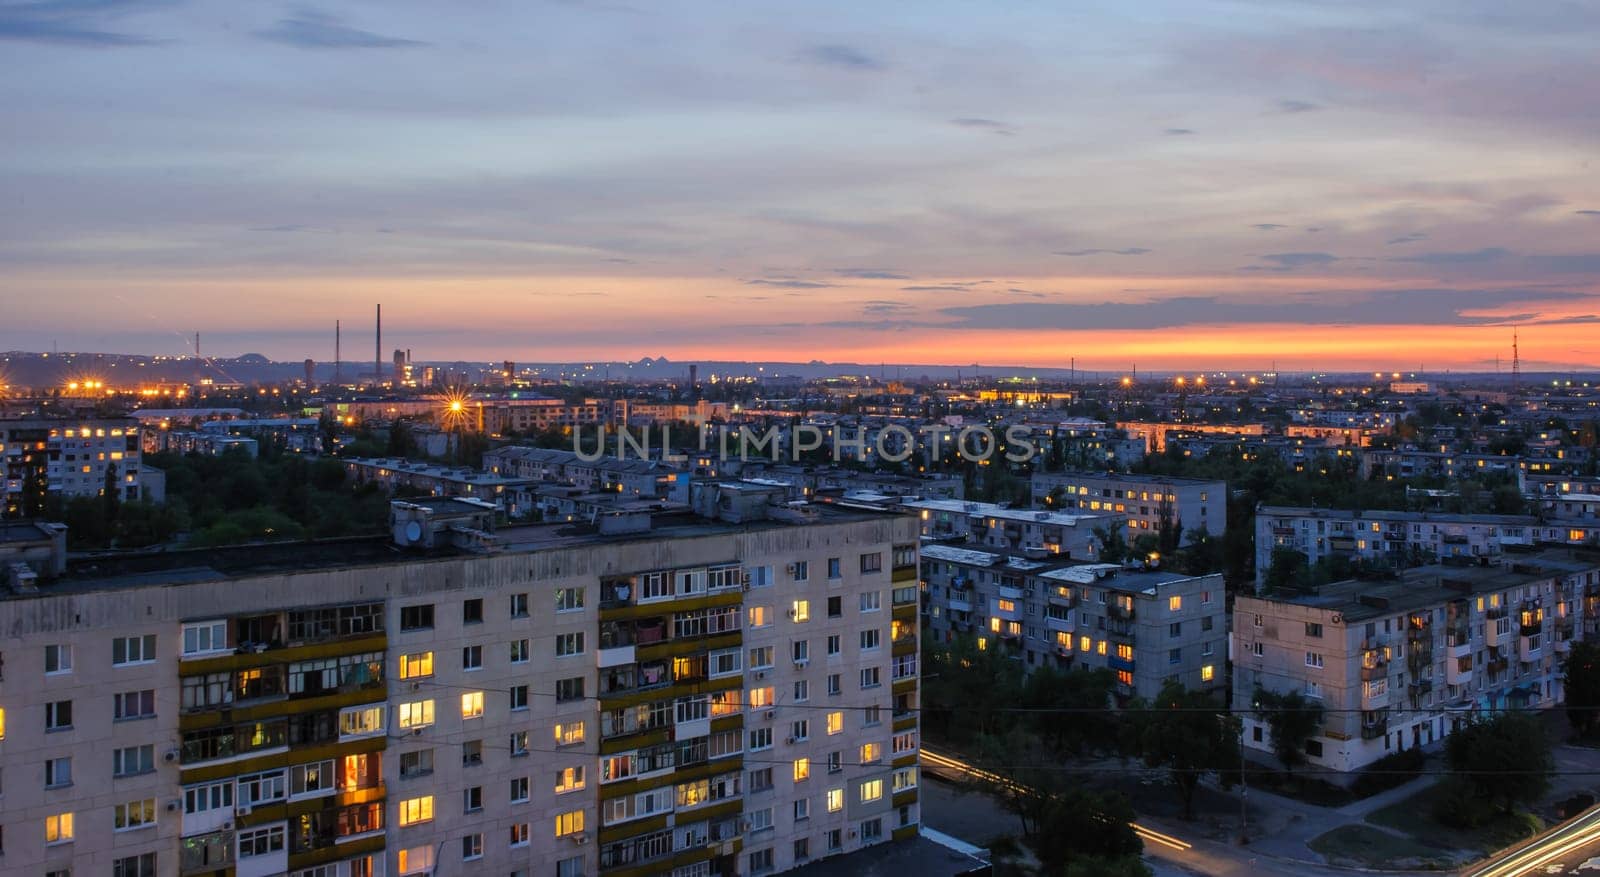 view from the roof of the evening Severodonetsk before the war with Russia 2